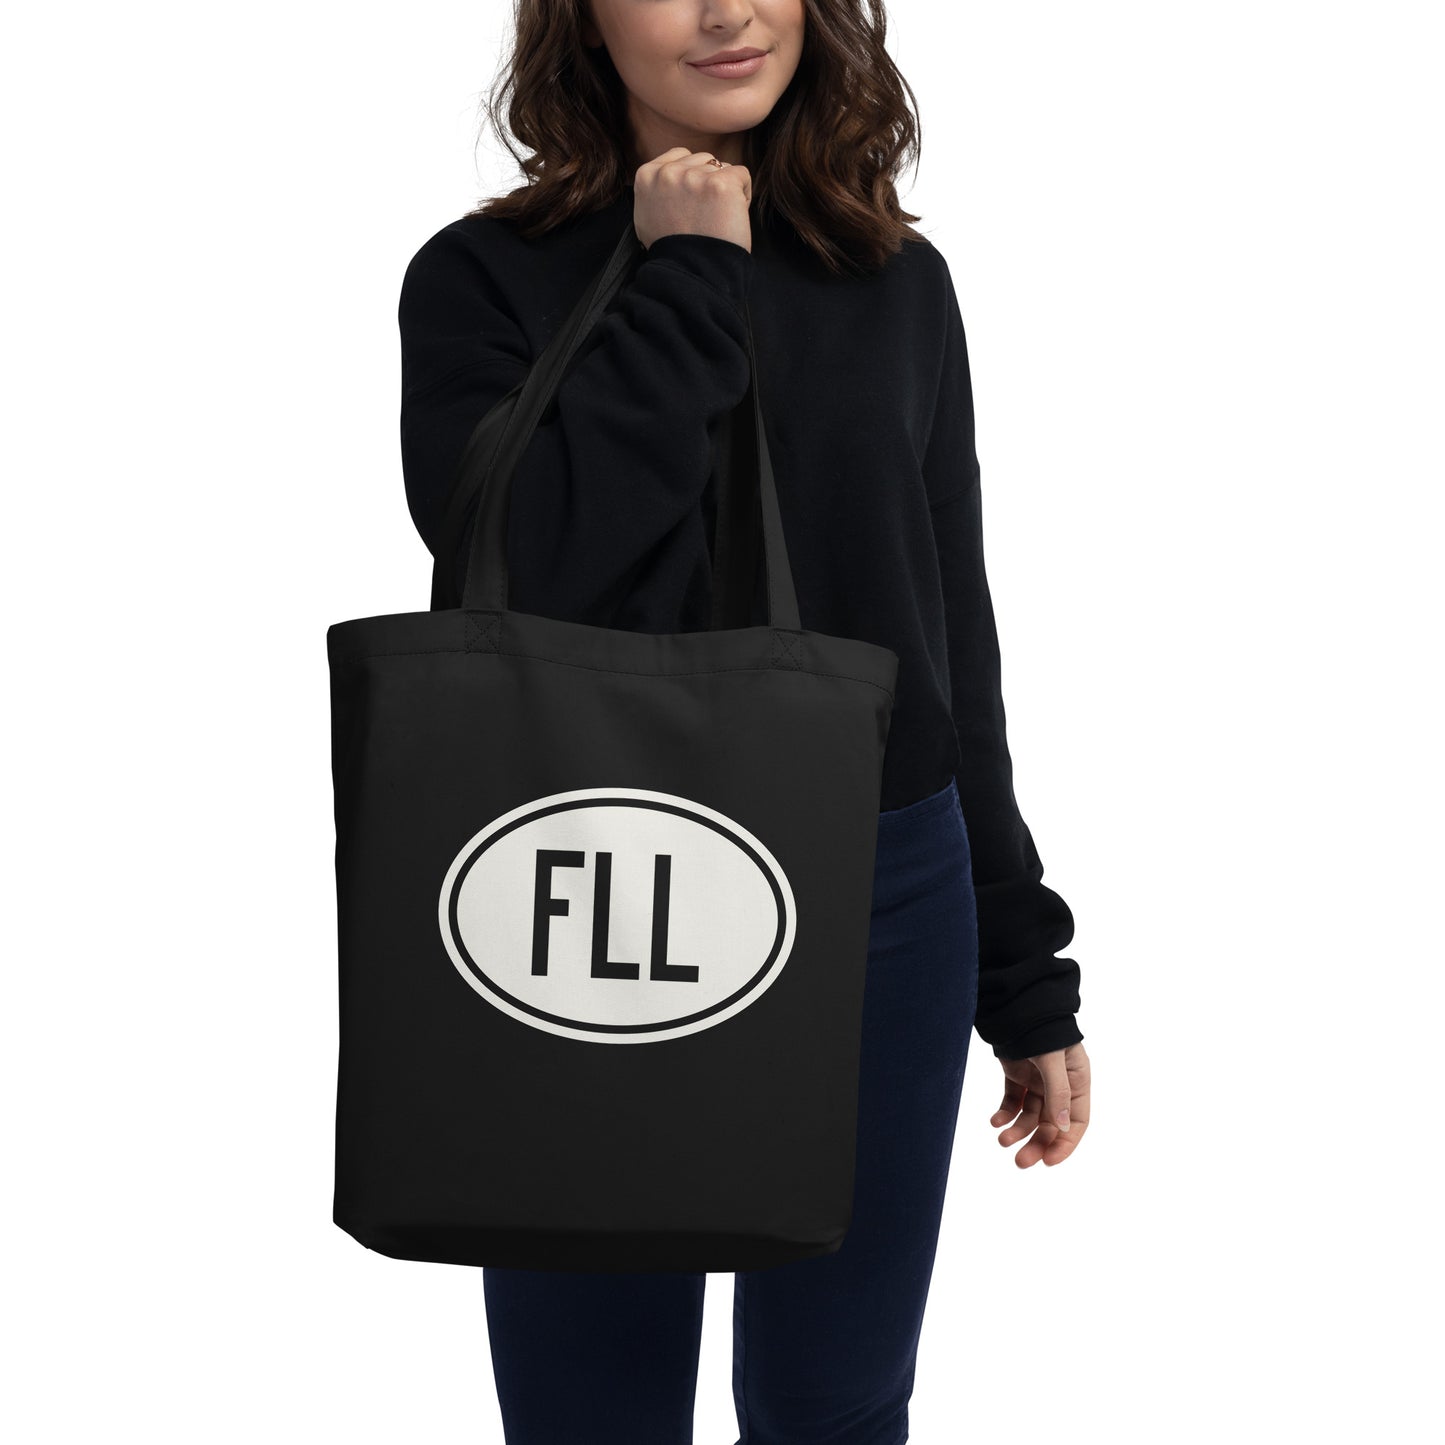 Unique Travel Gift Organic Tote - White Oval • FLL Fort Lauderdale • YHM Designs - Image 03